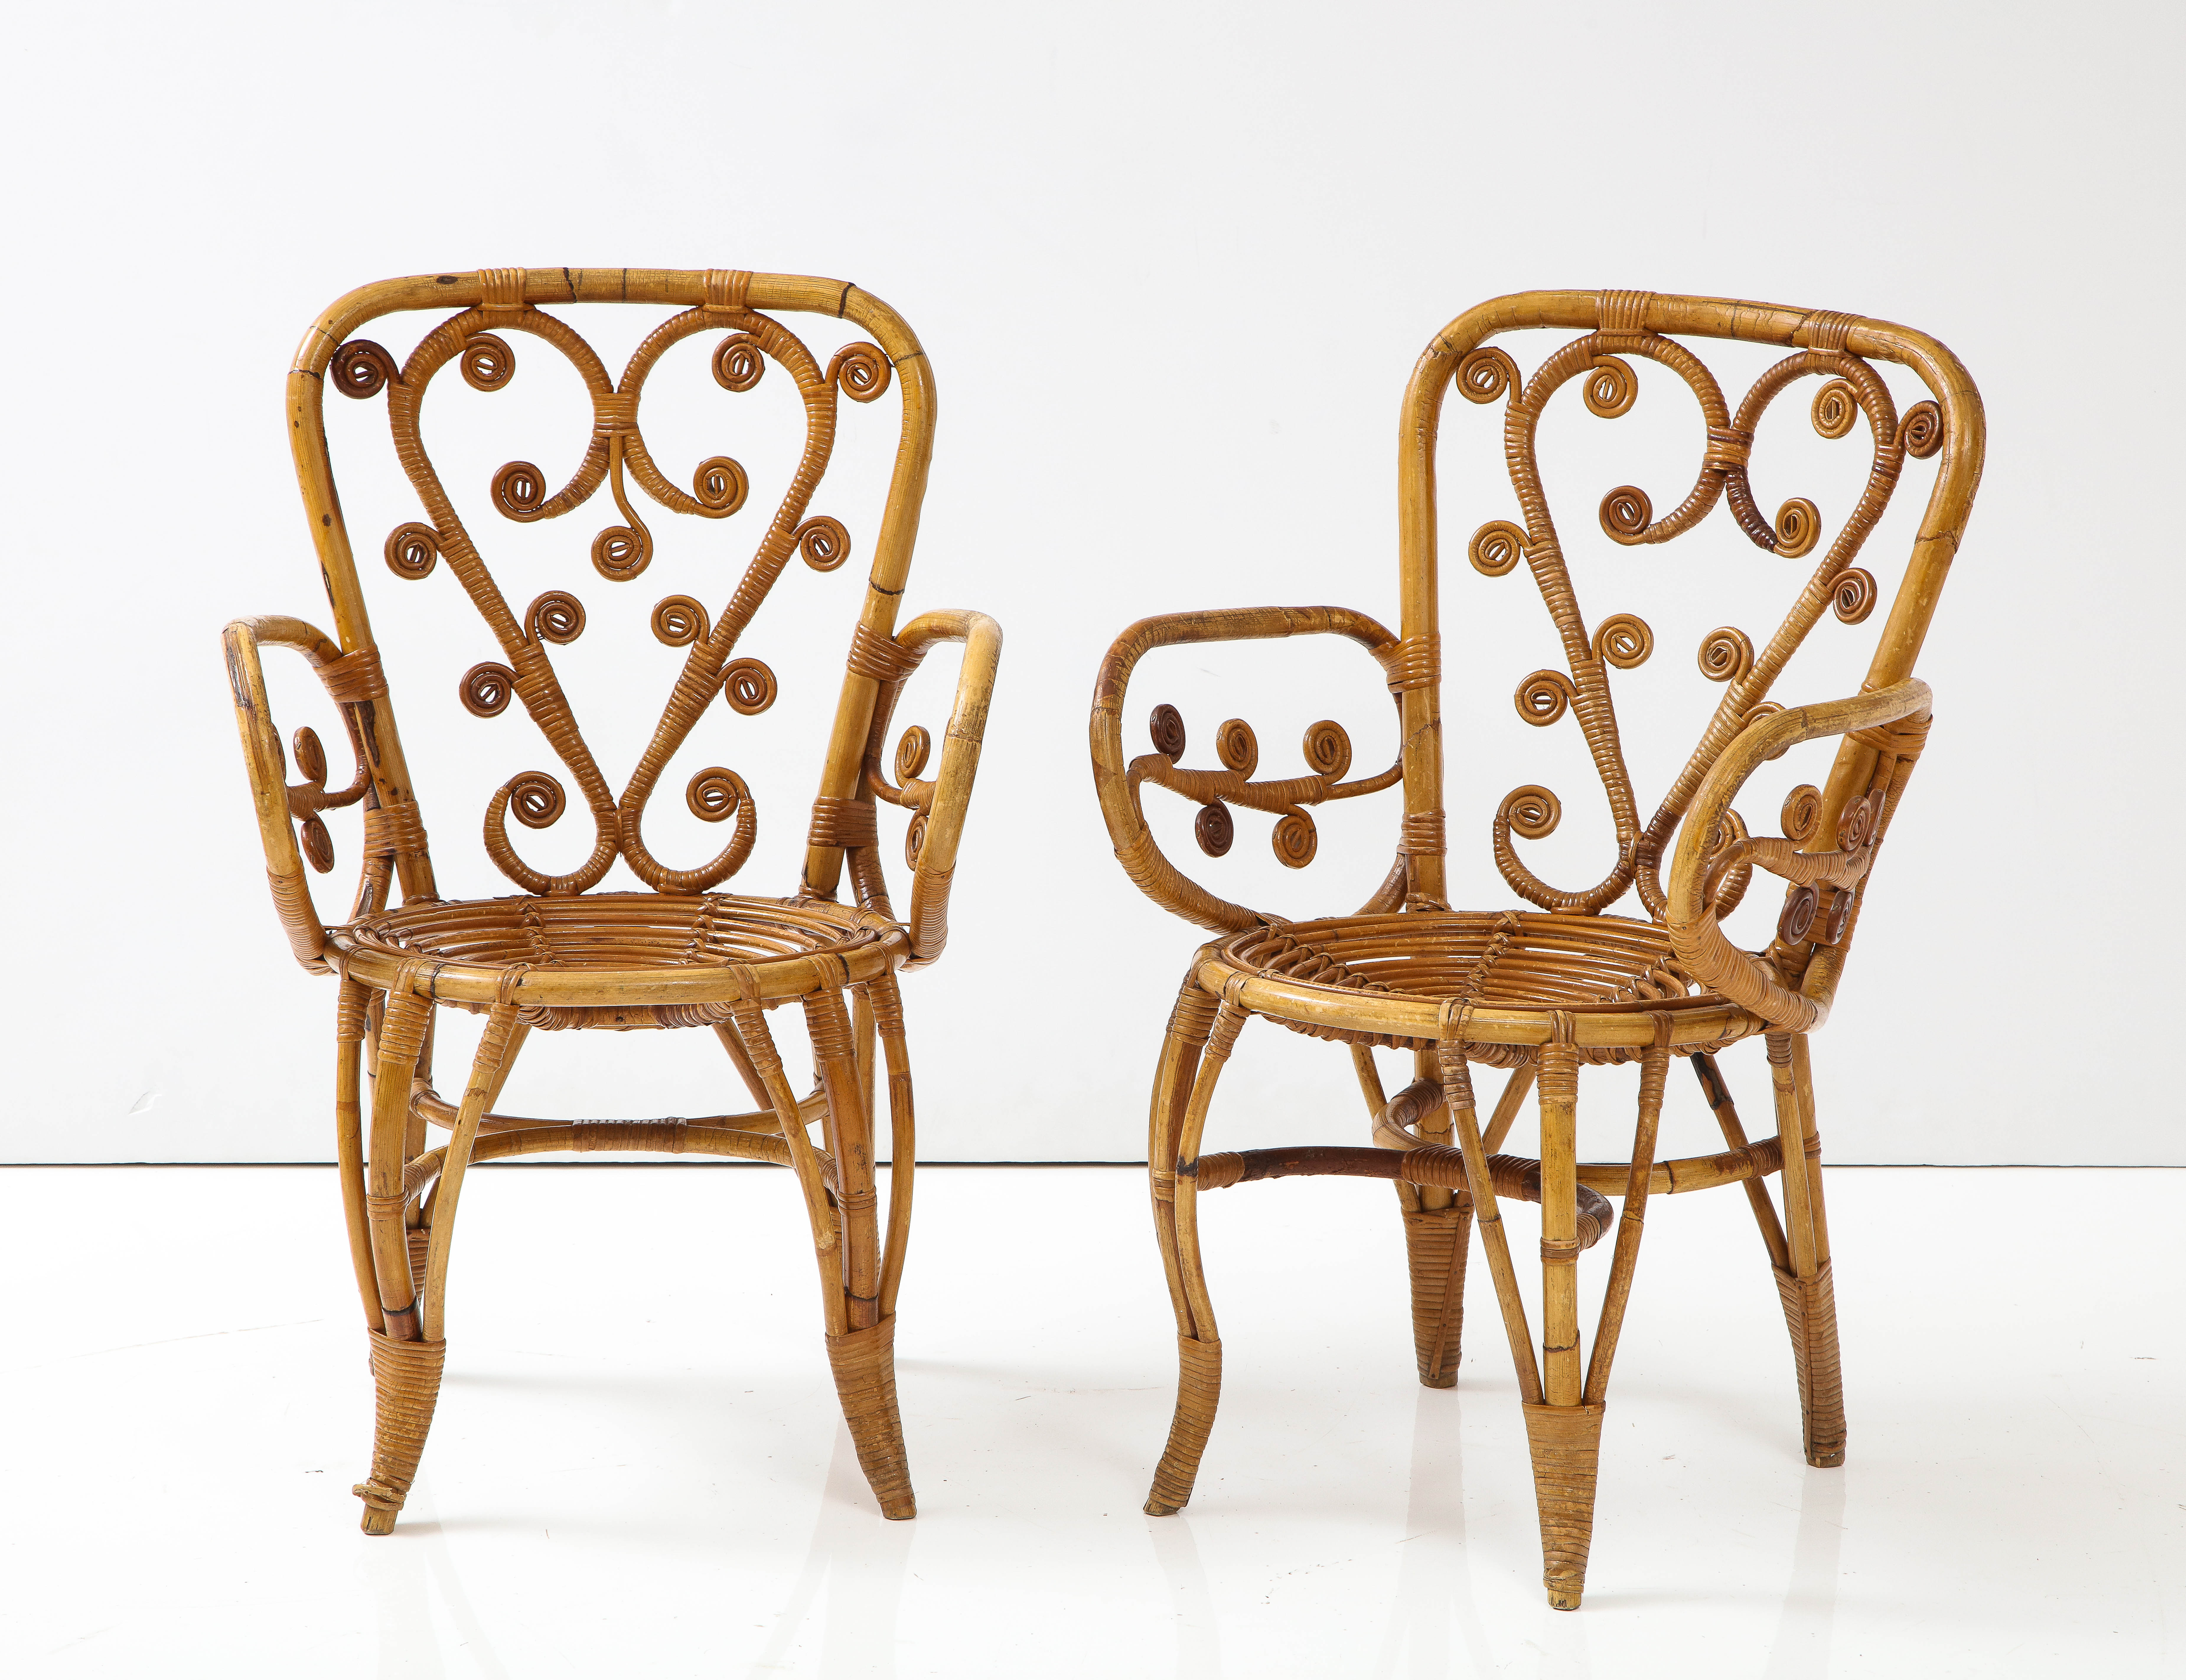 A pair of charming and whimsical Italian 1950's bamboo armchairs; the back with heart shape and scroll motif, the arms beautifully curved with branch like fanciful scroll decorations; the whole exquisitely and intricately carved and supported on